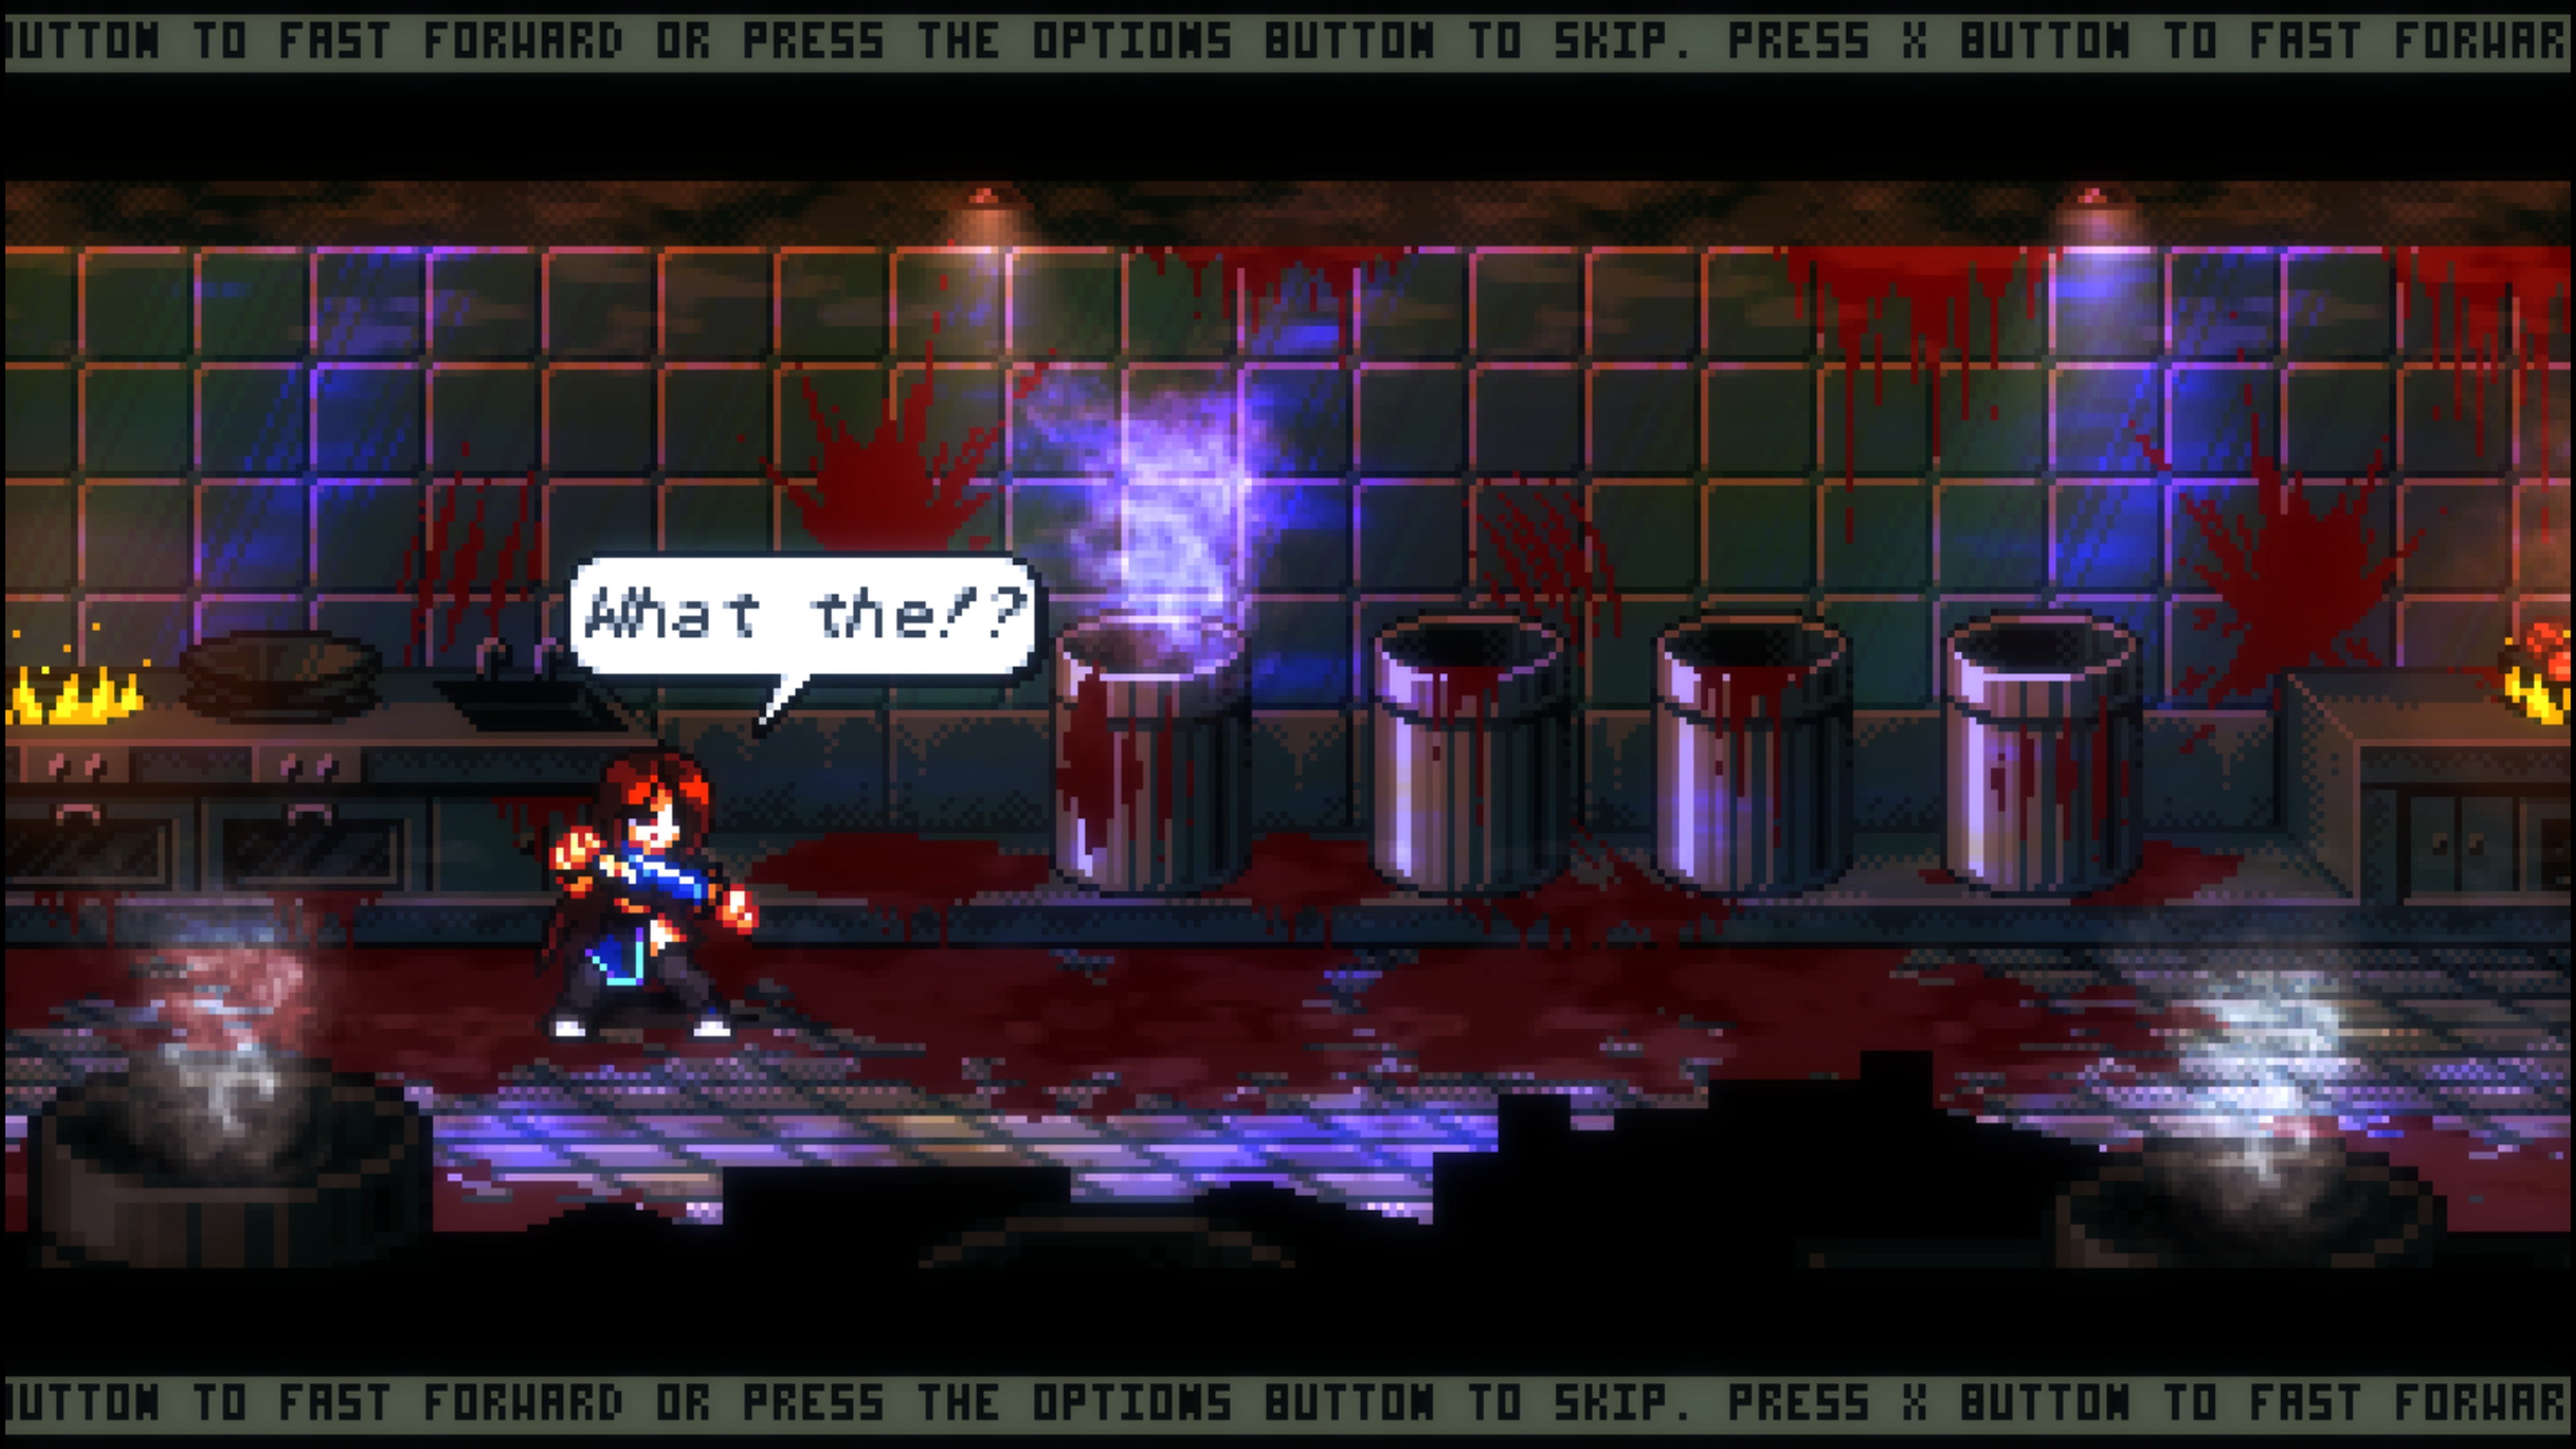 A 2D pixel art girl with brown hair and dressed in a blue outfit stands in a dank looking kitchen area that is covered in blood. Blood splattered green tiles in the background feature some bloody scratch marks as if made by an animal. The middle of the image has 4 large blood stained cooking pots one of which has smoke coming from it. A speech bubble above the characters head reads "What the!?"